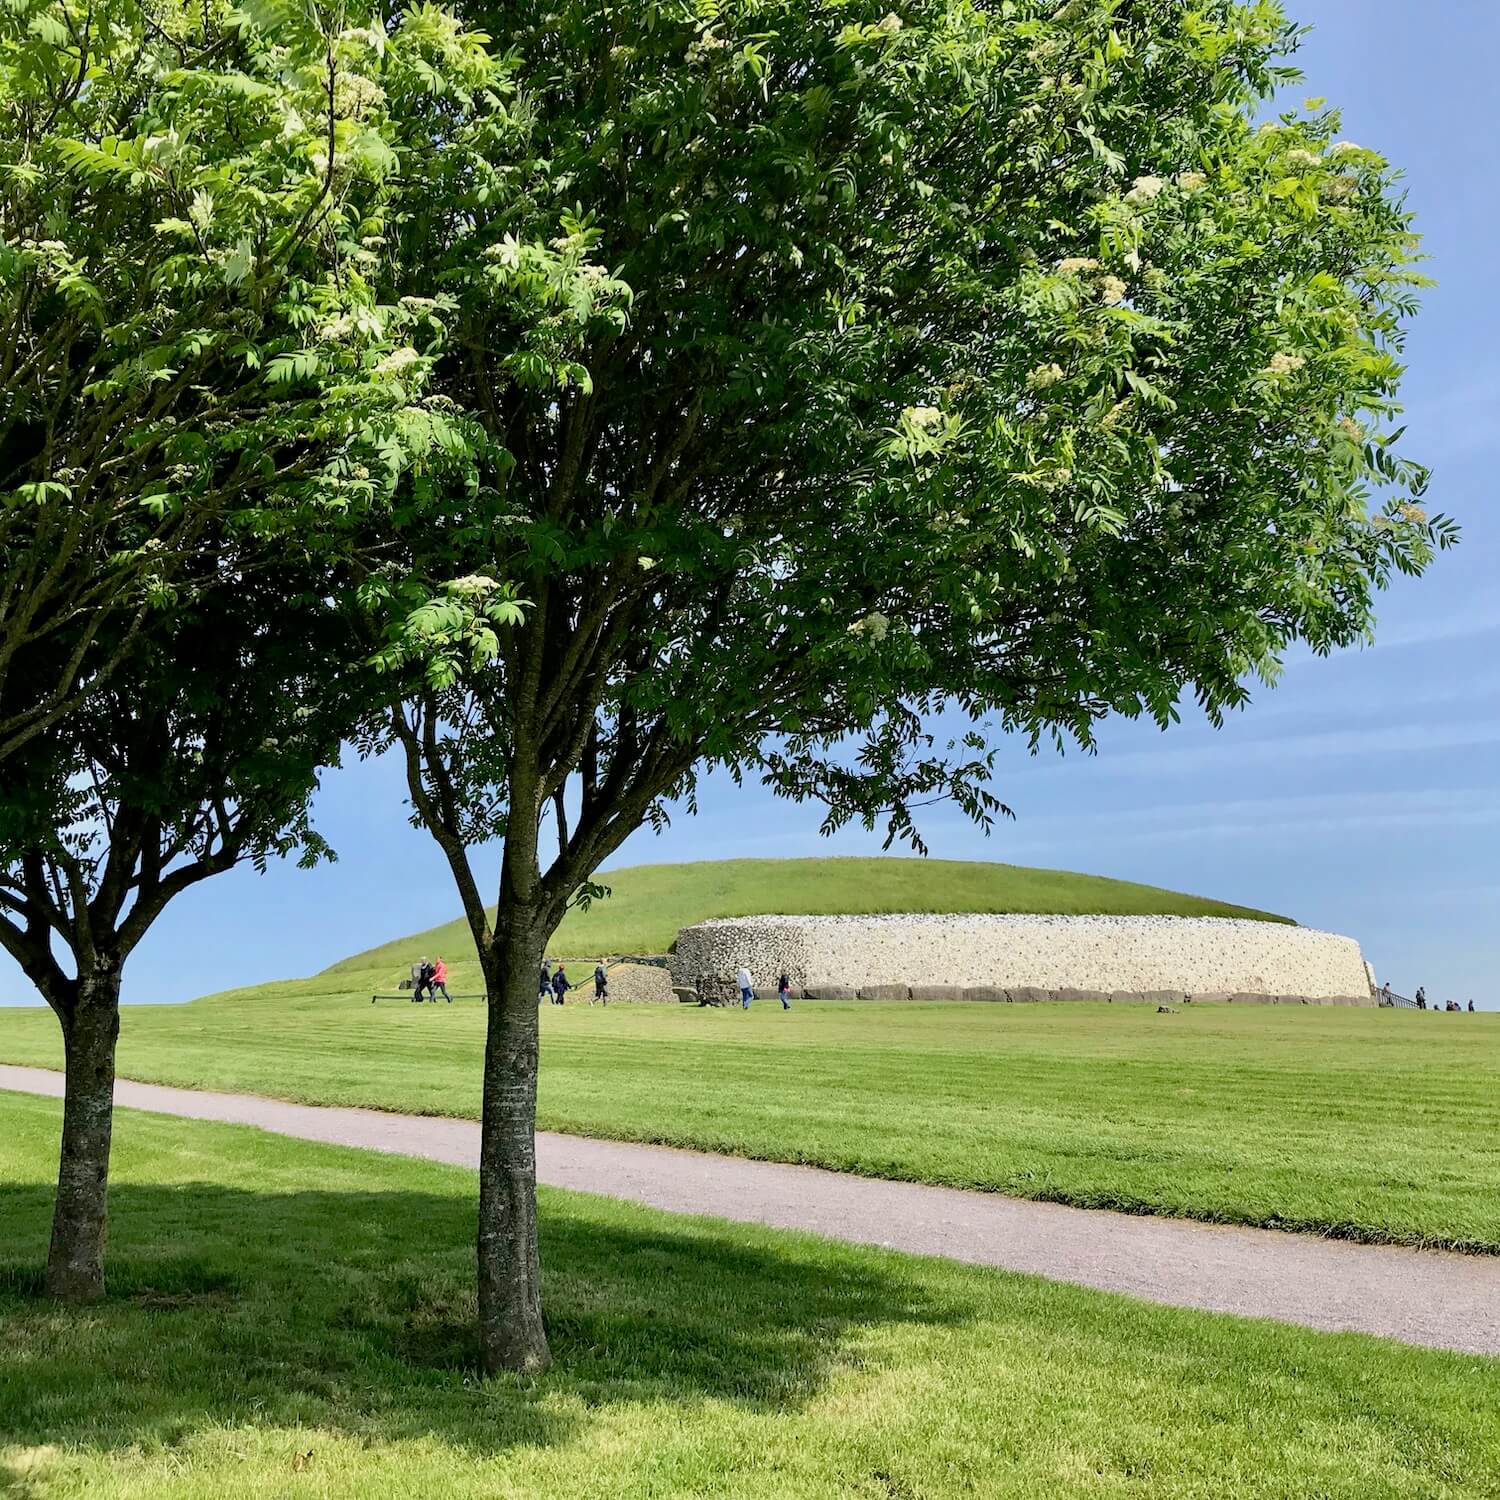 Newgrange Ireland is an ancient site with a large mound of rocks covered by a grassy knoll.  The winter solstice experience is mystical. 